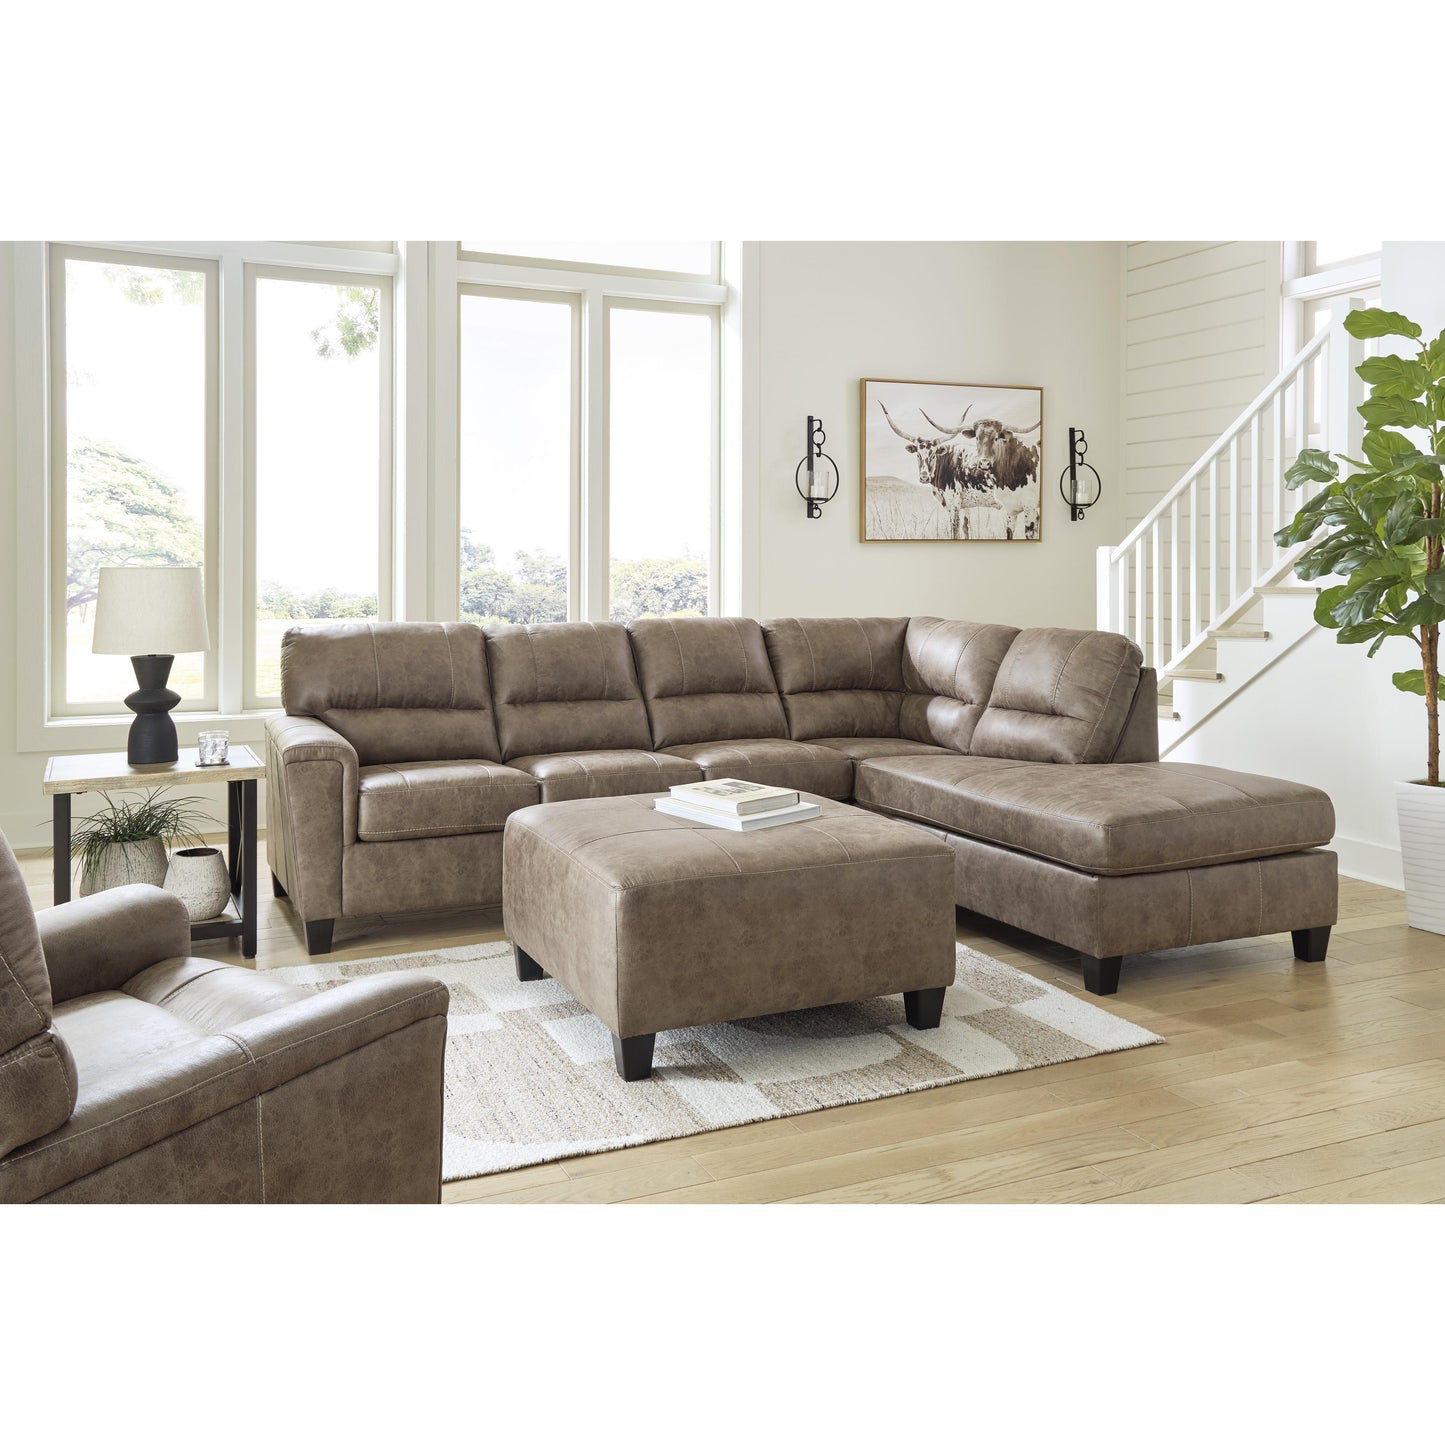 Signature Design by Ashley Recliners Manual 9400425 IMAGE 8